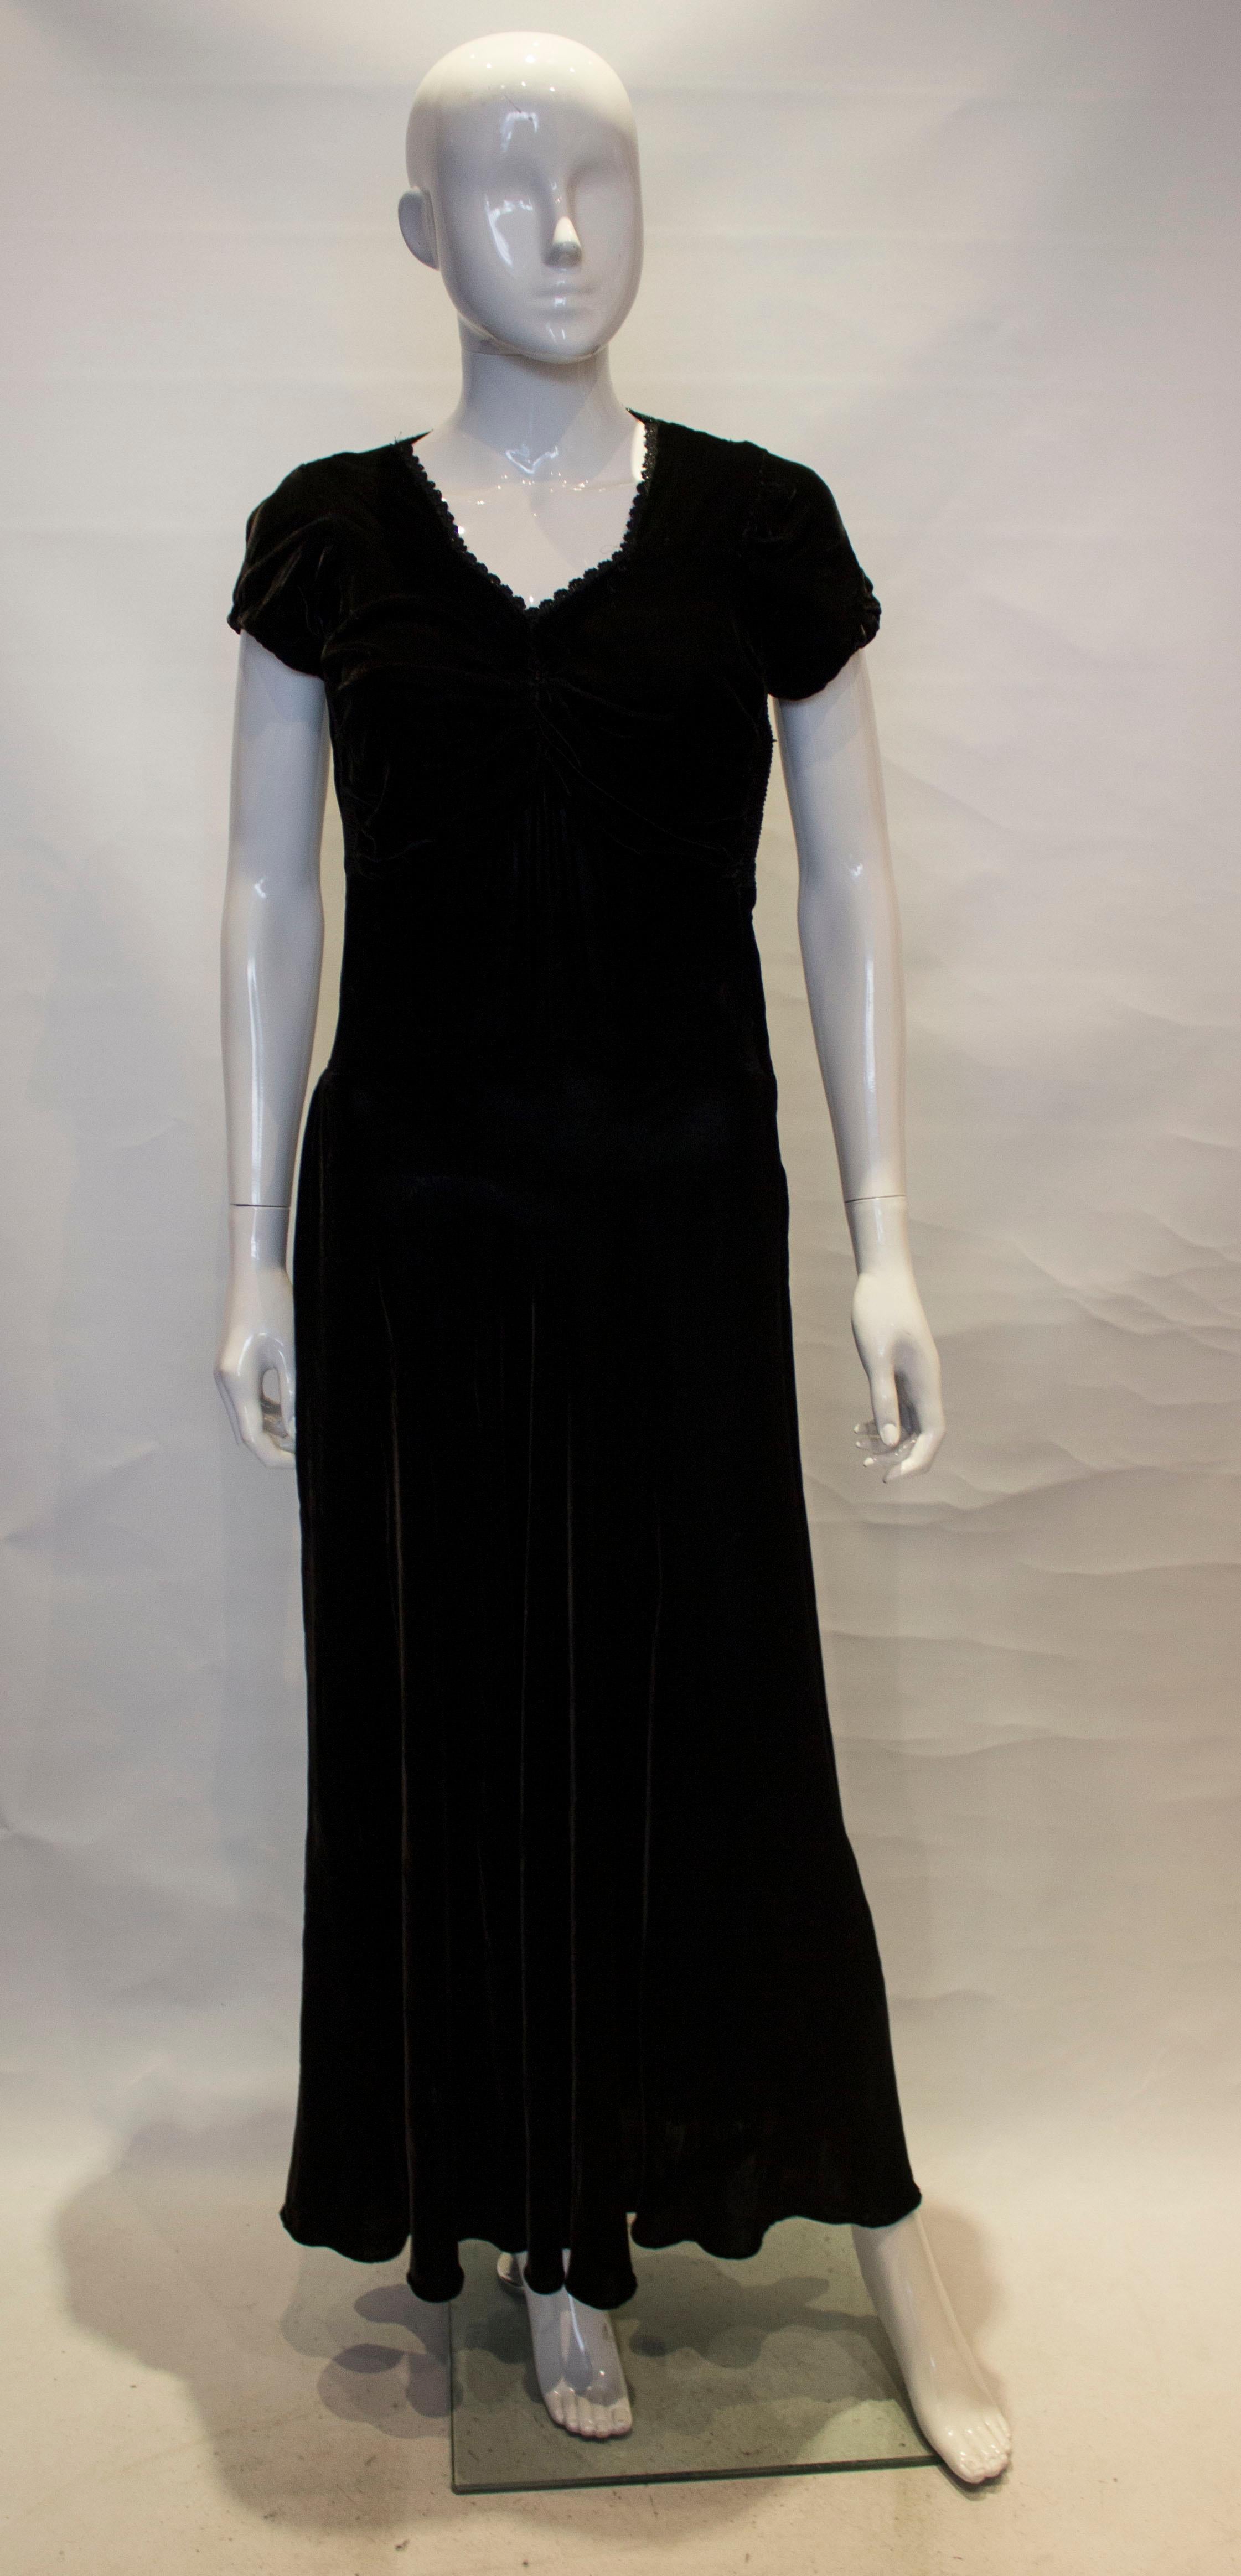  A stunning vintage black velvet gown. The dress has a sweetheart neckline, with gathering at the bust and by the side seam. It has cap sleaves and a side zip.